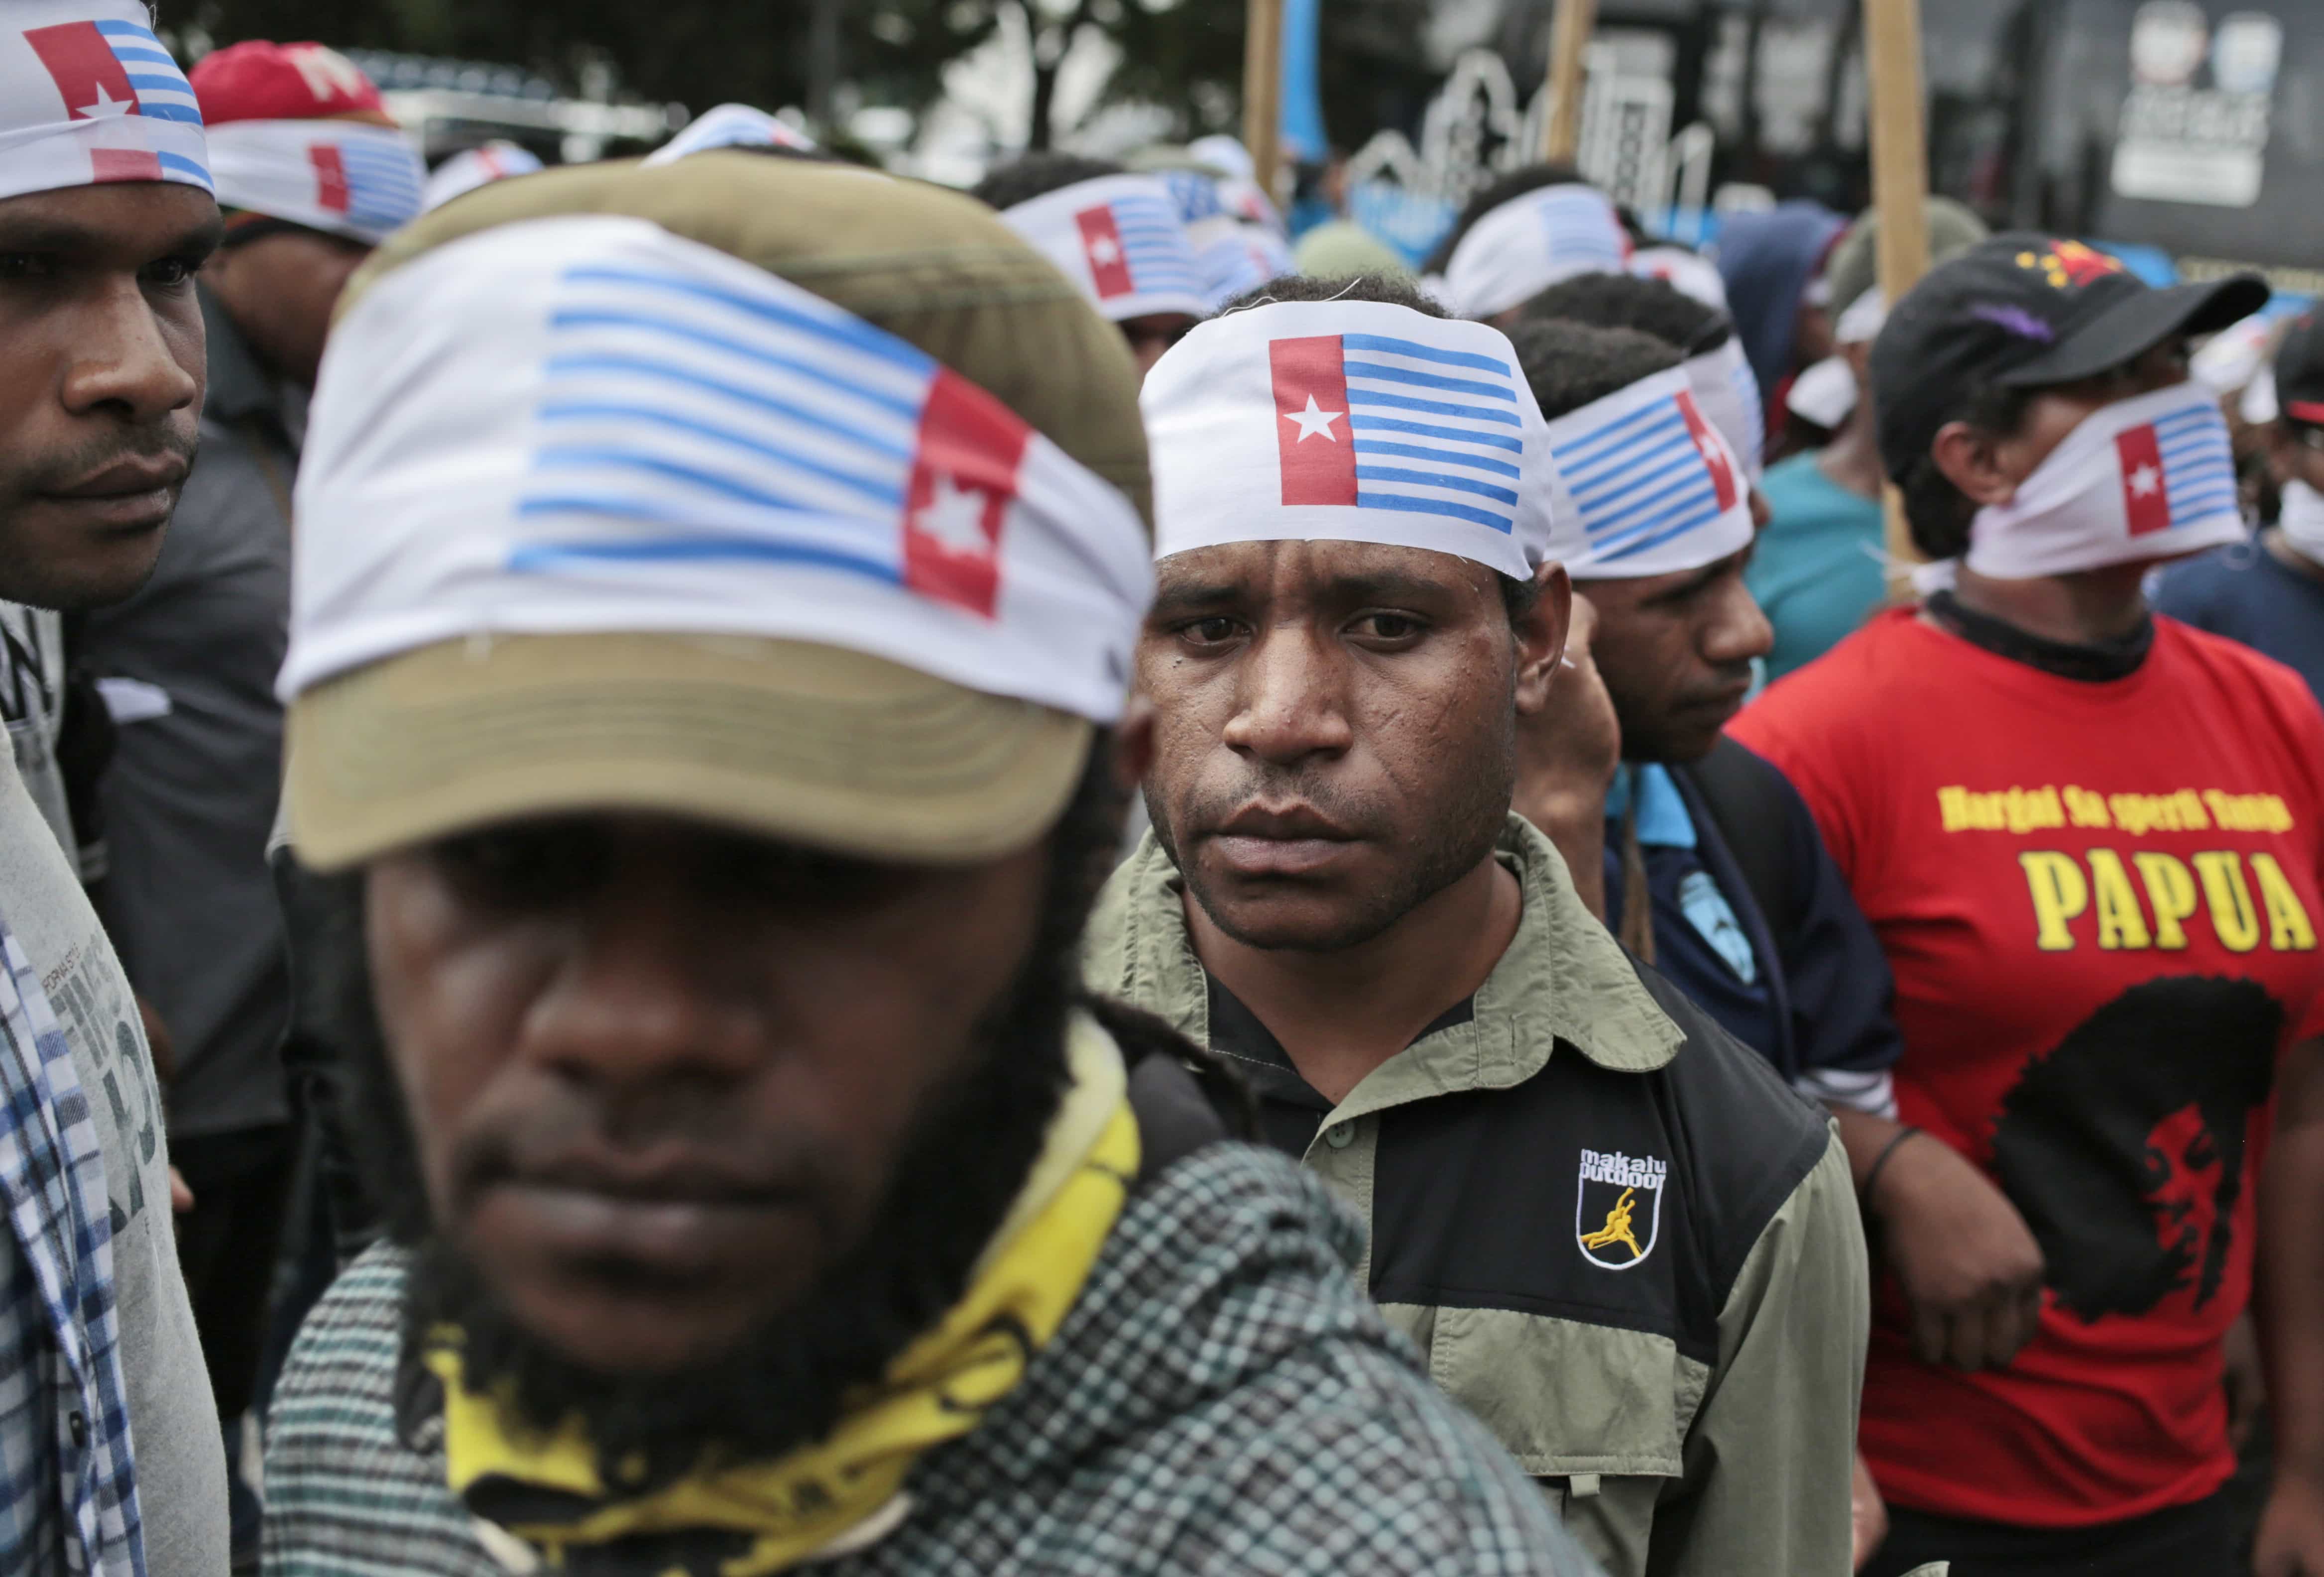 West Papuan protesters wear headbands with the banned "Morning Star" flag during a rally calling for the remote region's independence, in Jakarta, 1 December 2016, AP Photo/Dita Alangkara